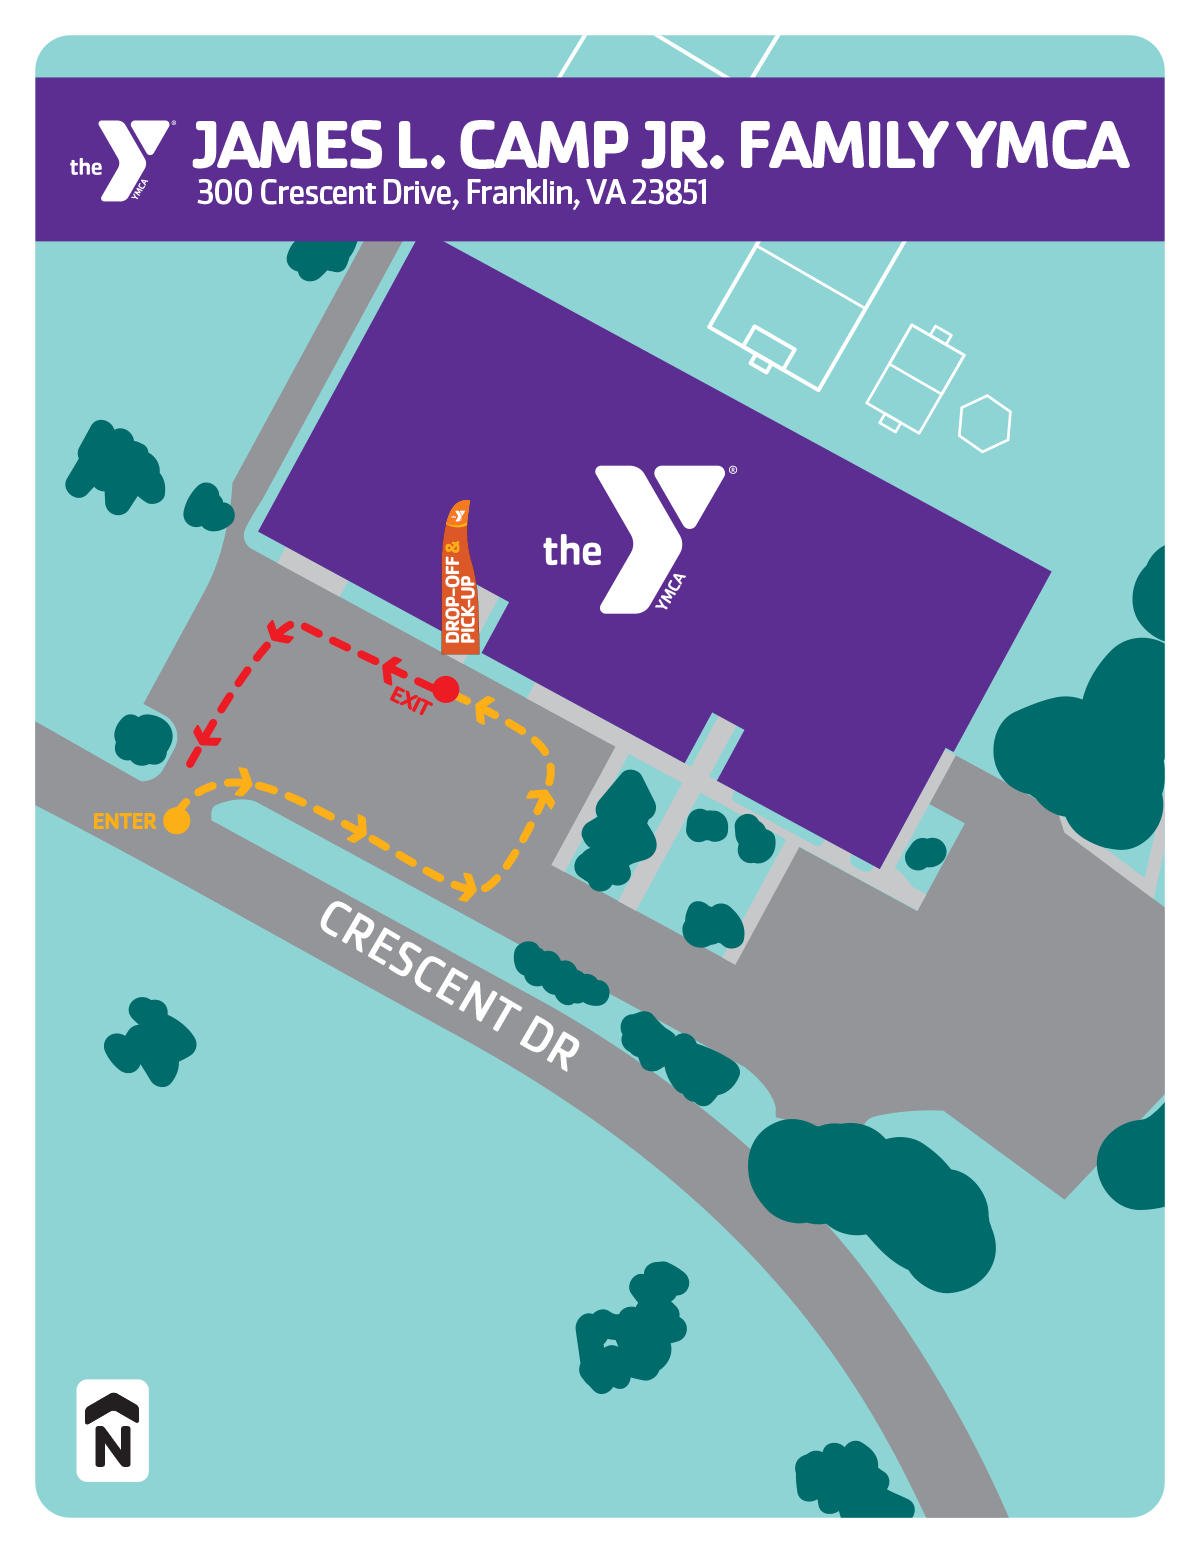 Summer camp drop-off & pick-up locations for the James L. Camp Jr. Family YMCA